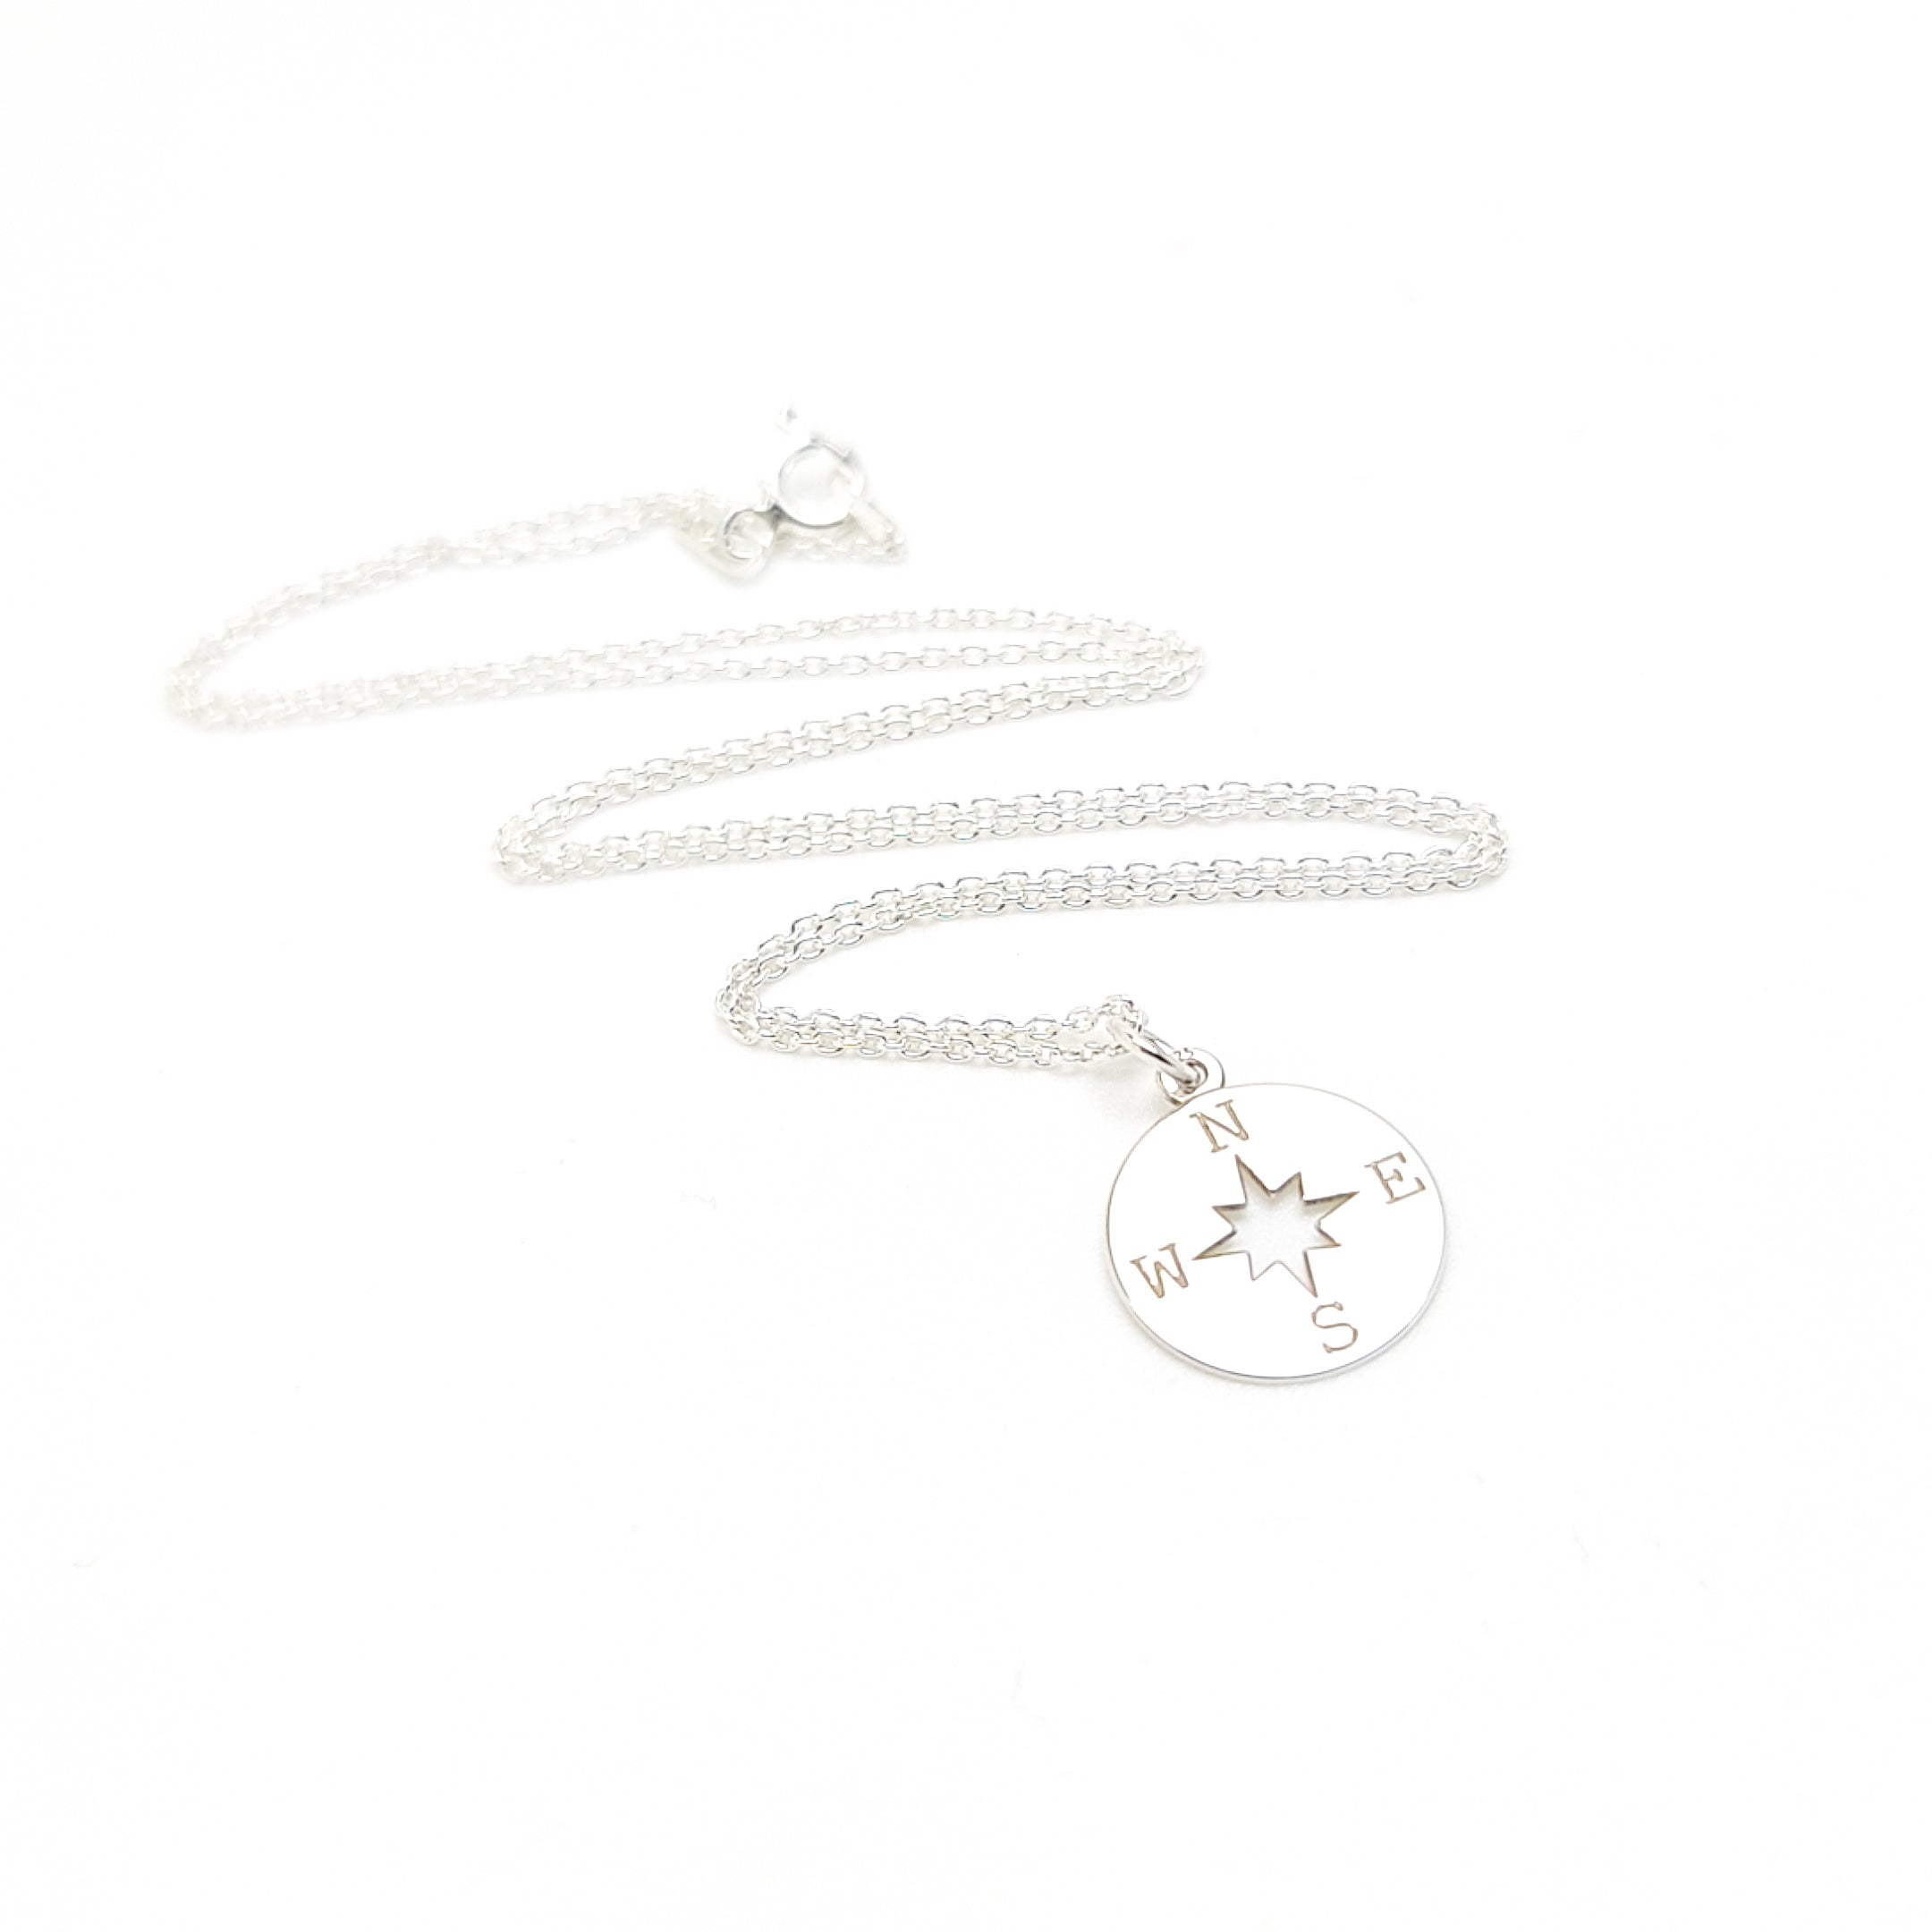 FINDING YOUR WAY | COMPASS WIND ROSE Silver Necklace